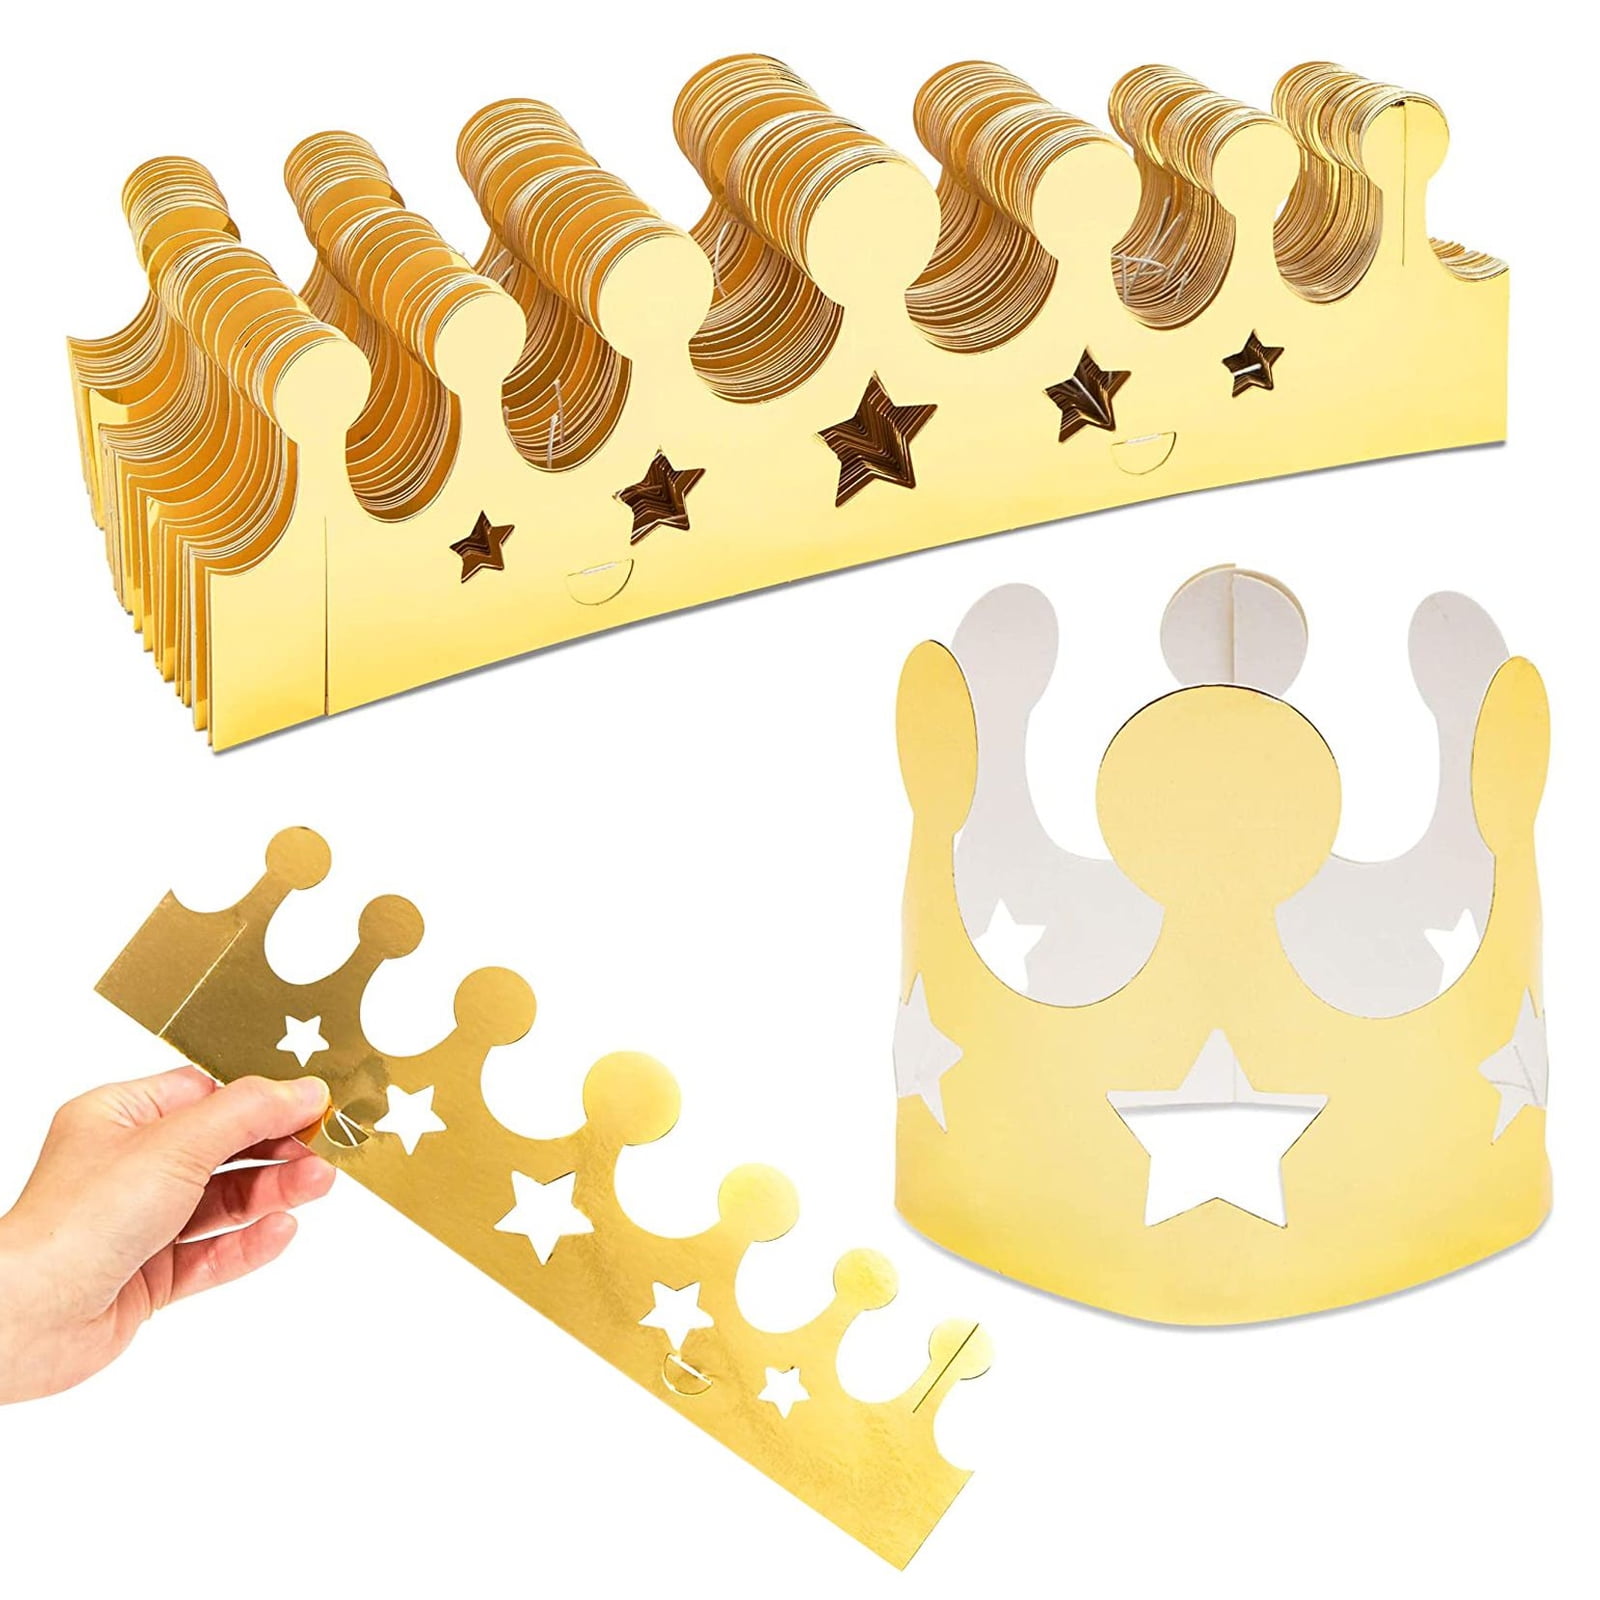 8PCS Golden Paper Crown Hats Party Gold King Crown Paper Hats Gold Party Hat Paper Princess Crowns with Self-Adhesive Rhinestone Sticker Number Letter Stickers for Boys Girls Adults Kids Celebration 